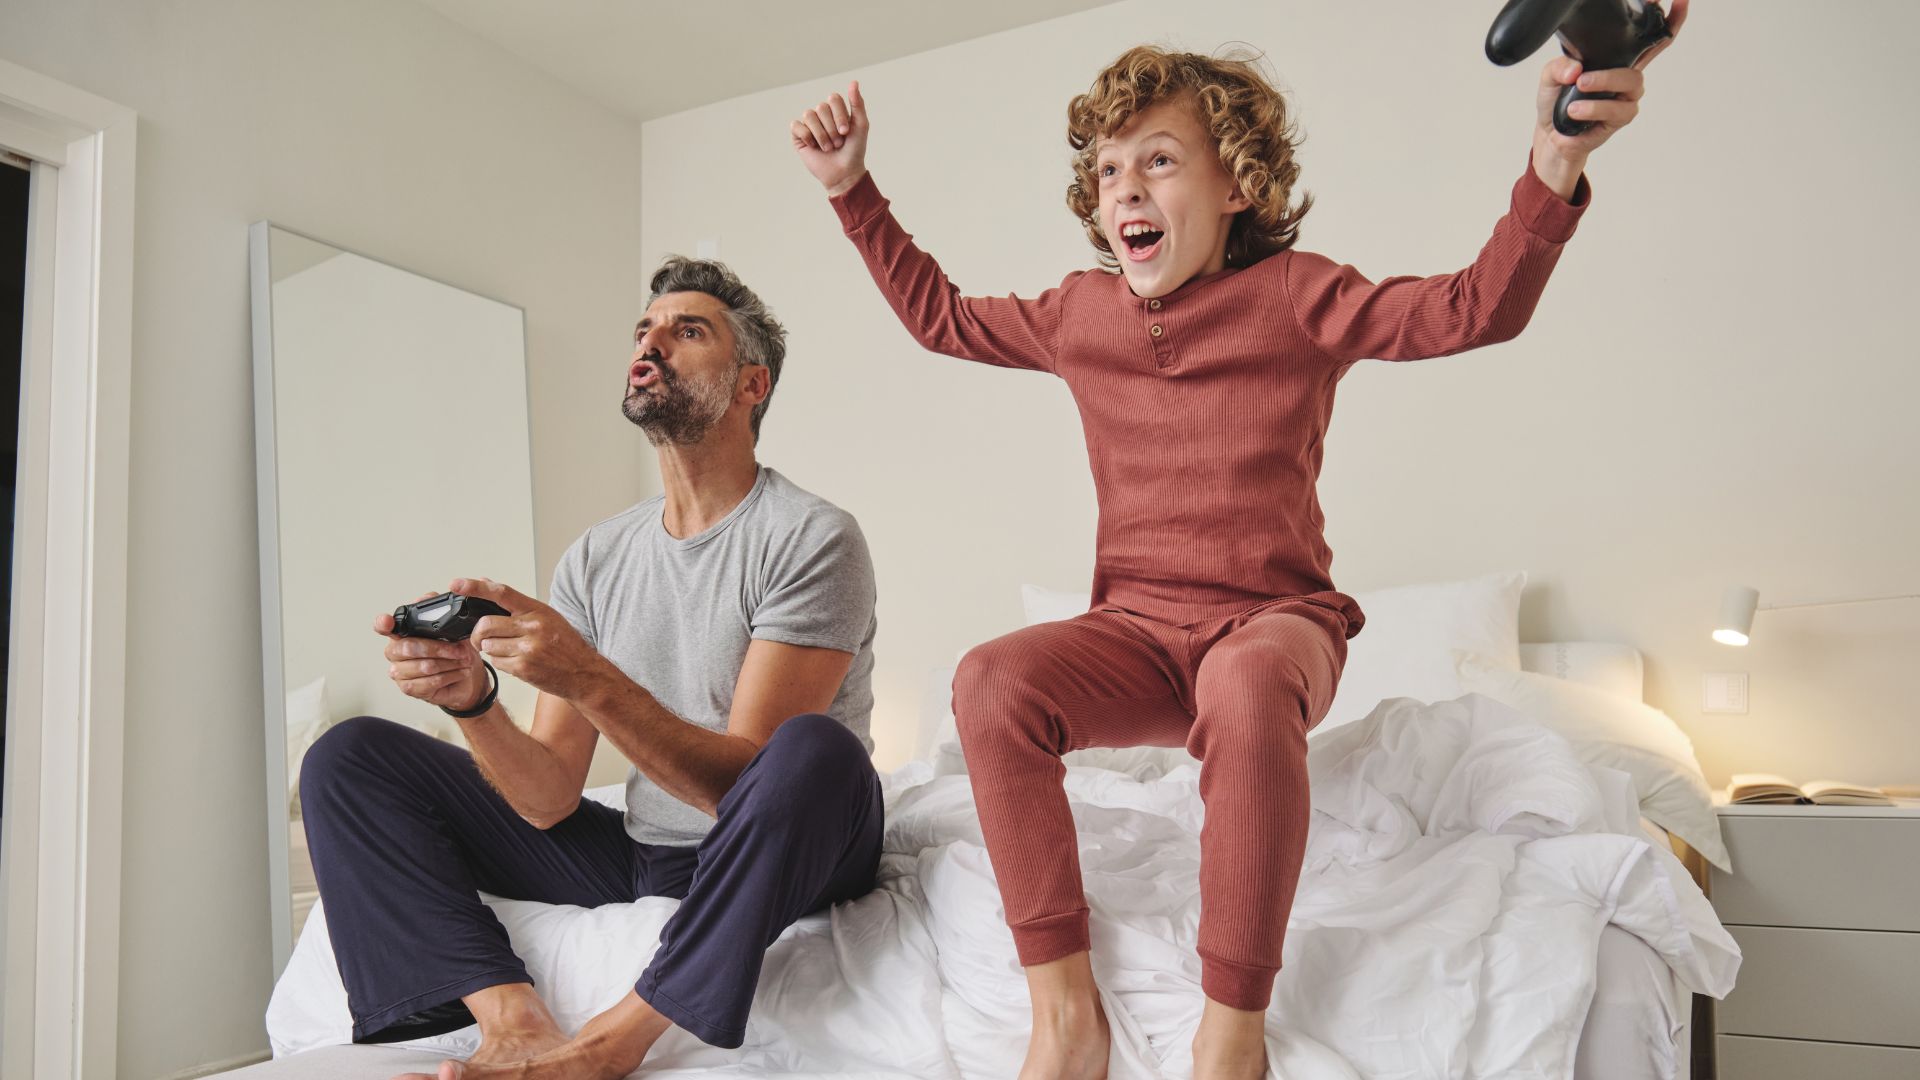 7 education benefits of videogames